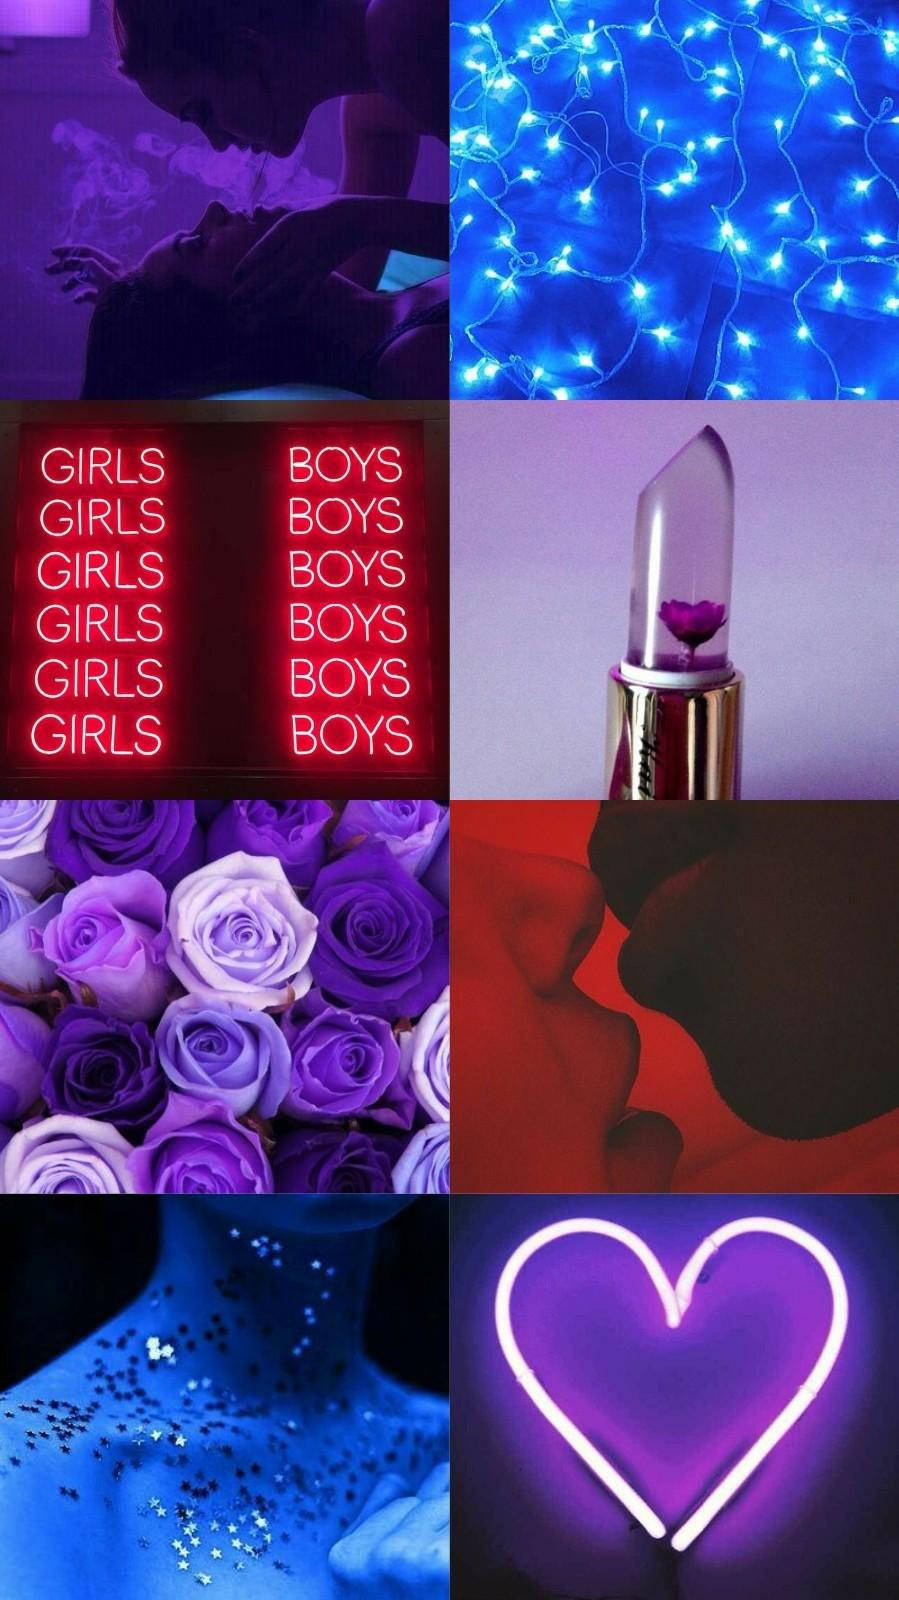 Bisexual Aesthetic Collage Wallpaper